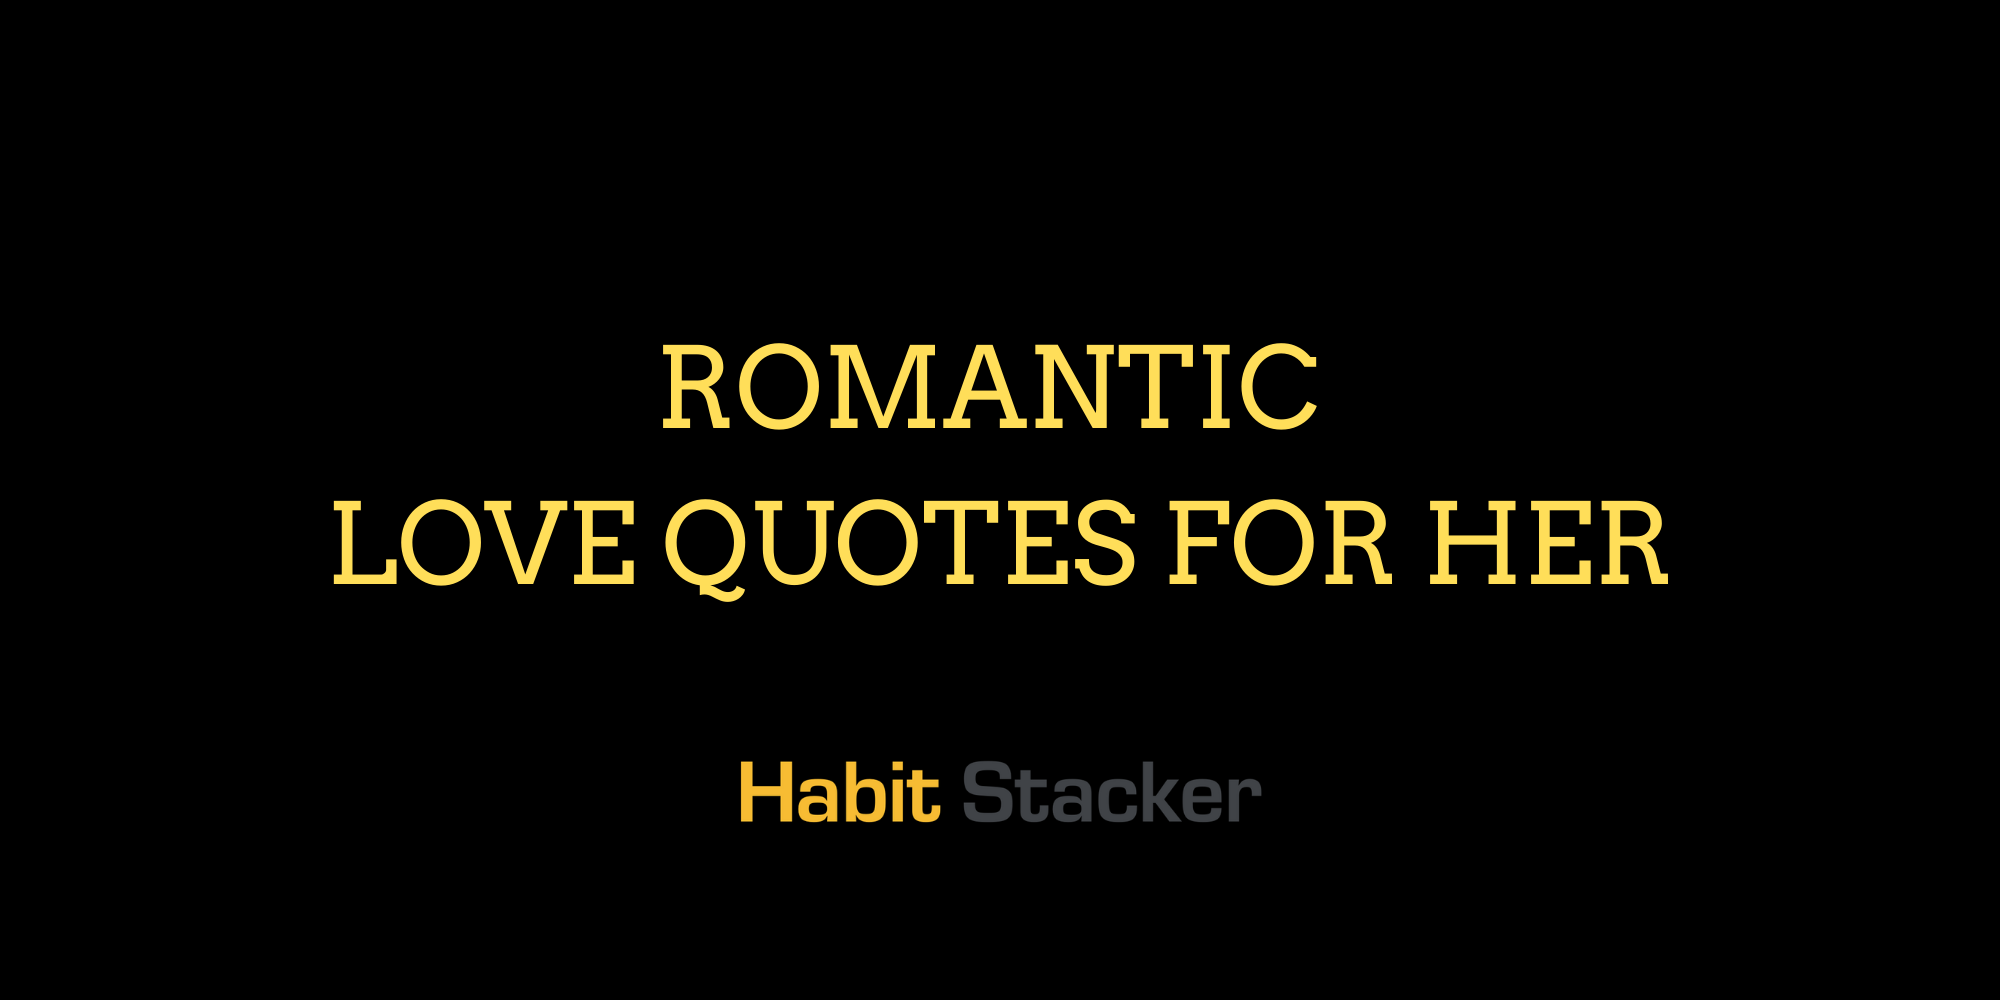 40 Romantic Love Quotes for Her - Habit Stacker